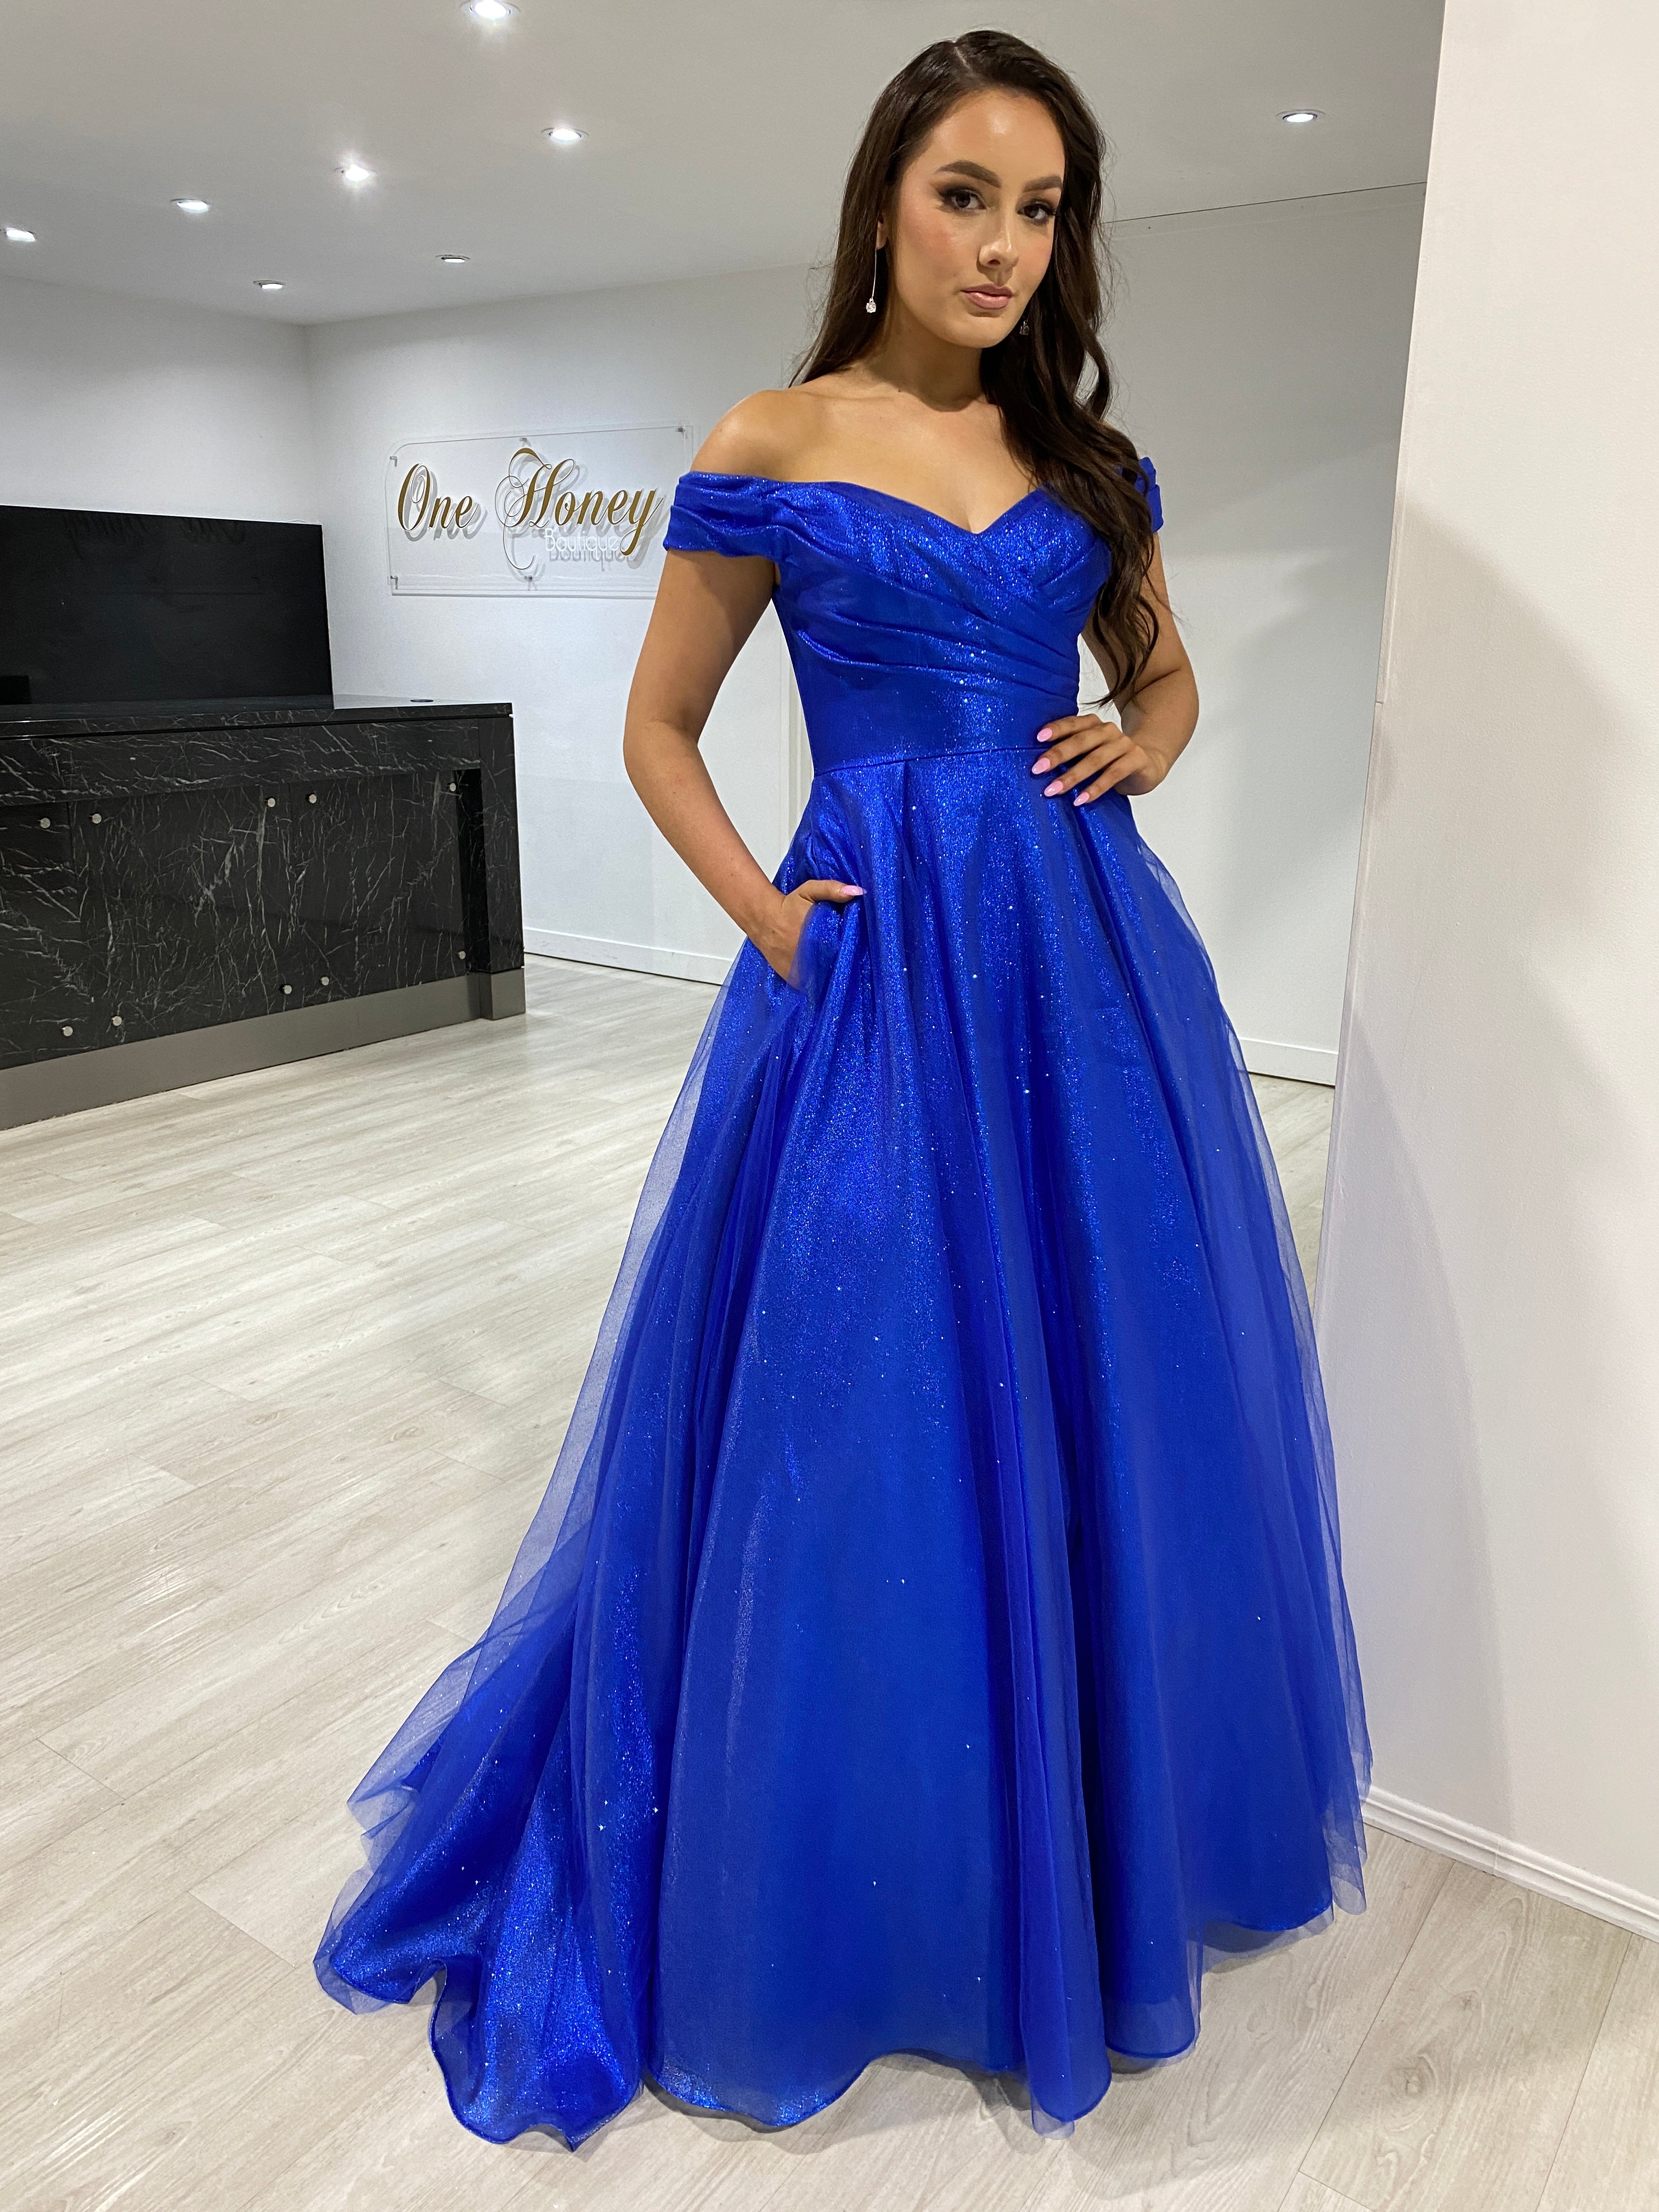 Honey Couture ARIANA Royal Blue Shimmer Ballgown Formal Dress